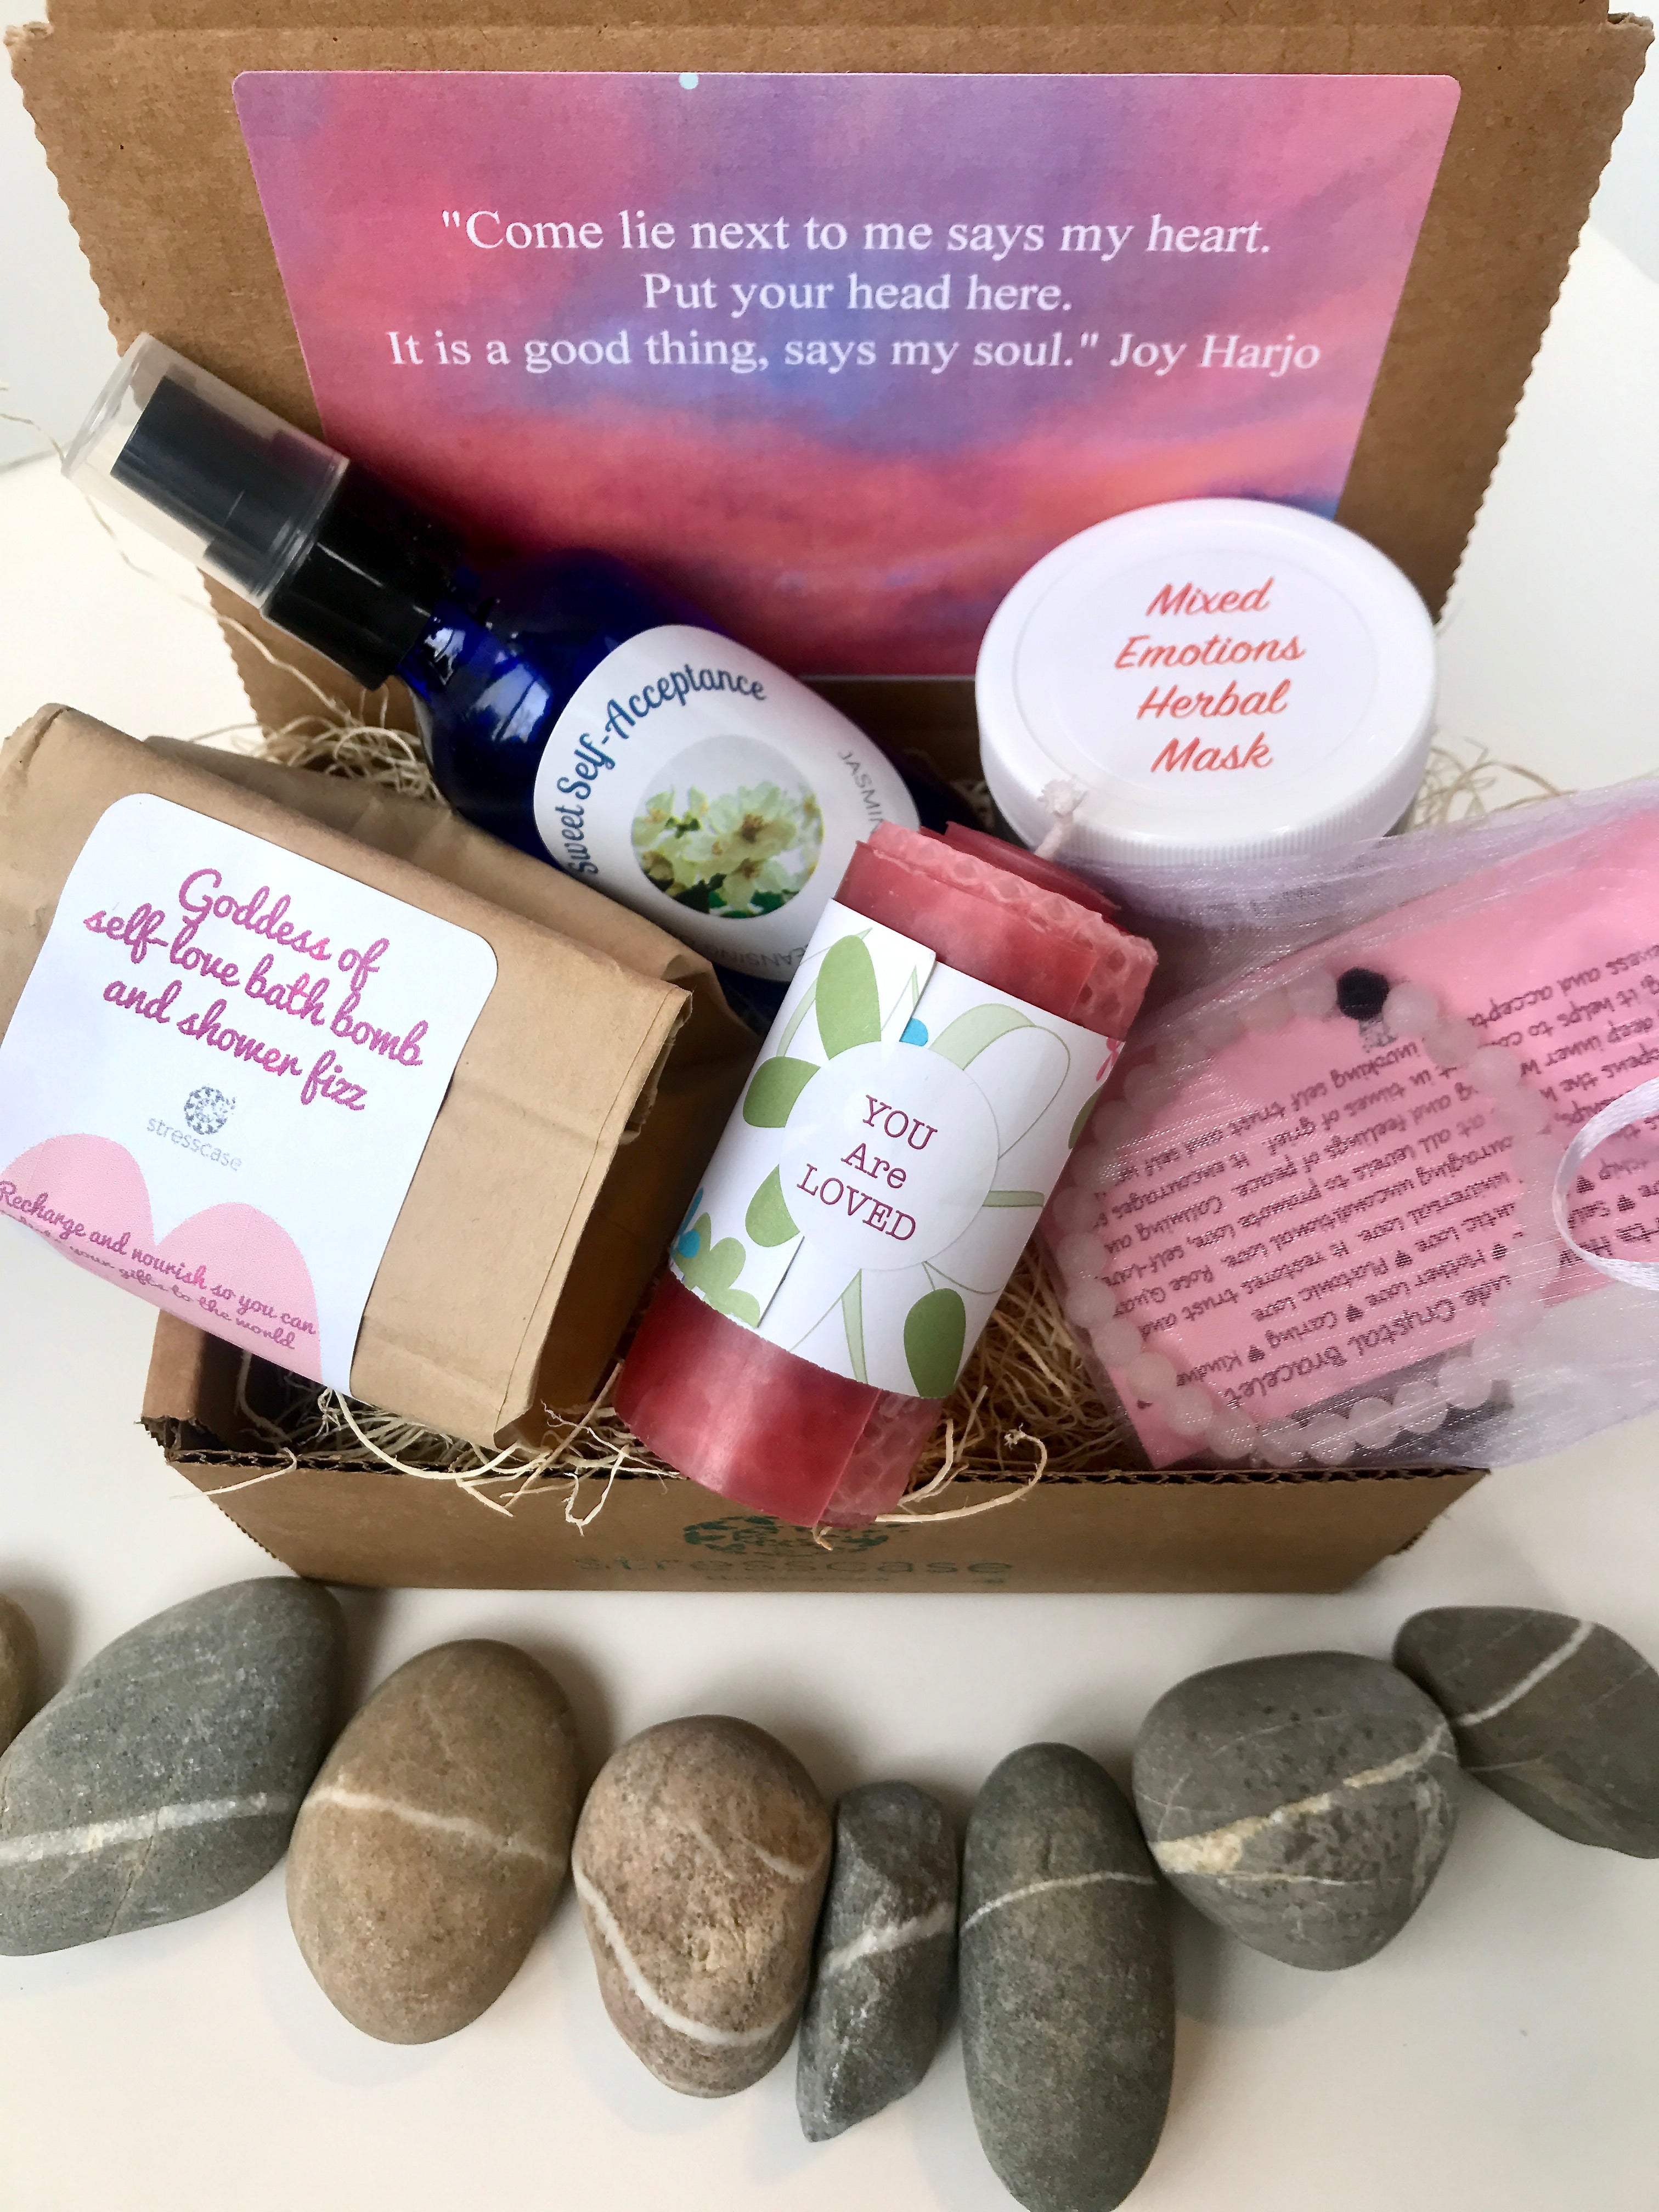 Goddess of Self-Love gift box promoting self-love containing natural cruelty-free personal spa and self care products for women.